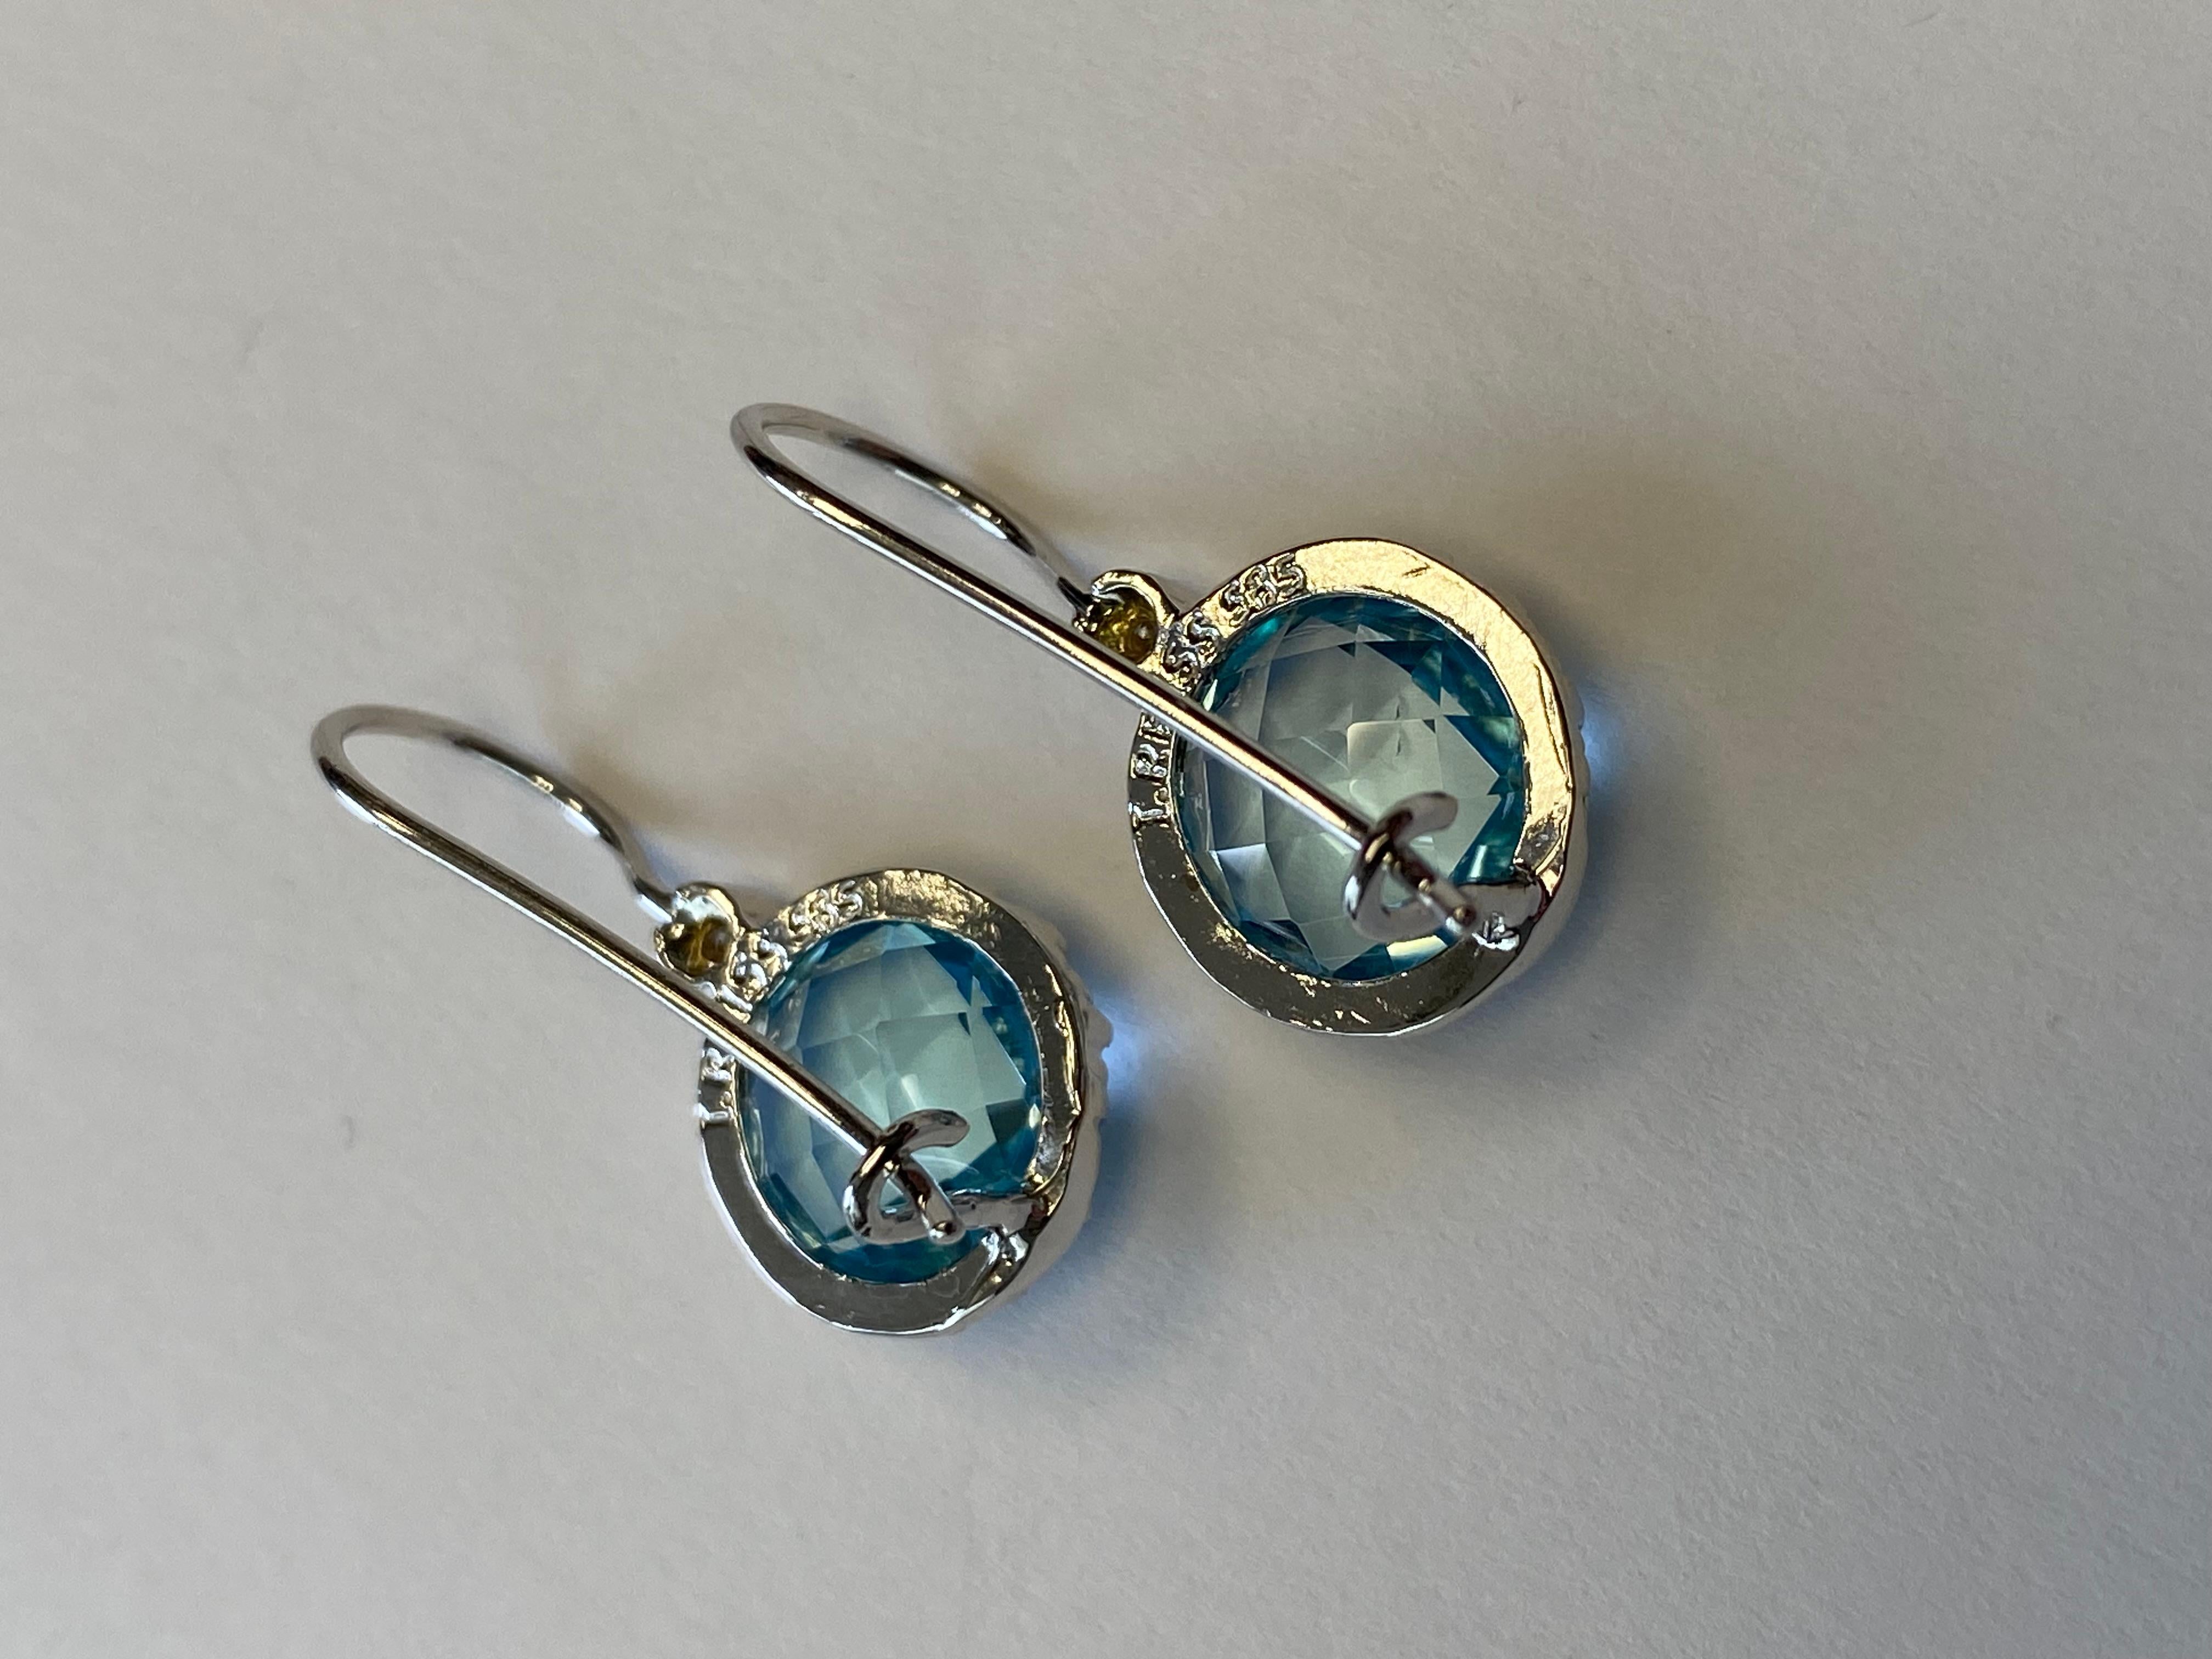 14 Karat White Gold Hand-Crafted Polish-Finished Drop Earrings, Centered with a 10mm 8.5CT Round Checkerboard-Cut Semi-Precious Blue Topaz Color Stone, Accented with 0.03 Carats of Bezel Set Diamonds on a Kidney Wire Back Finding
